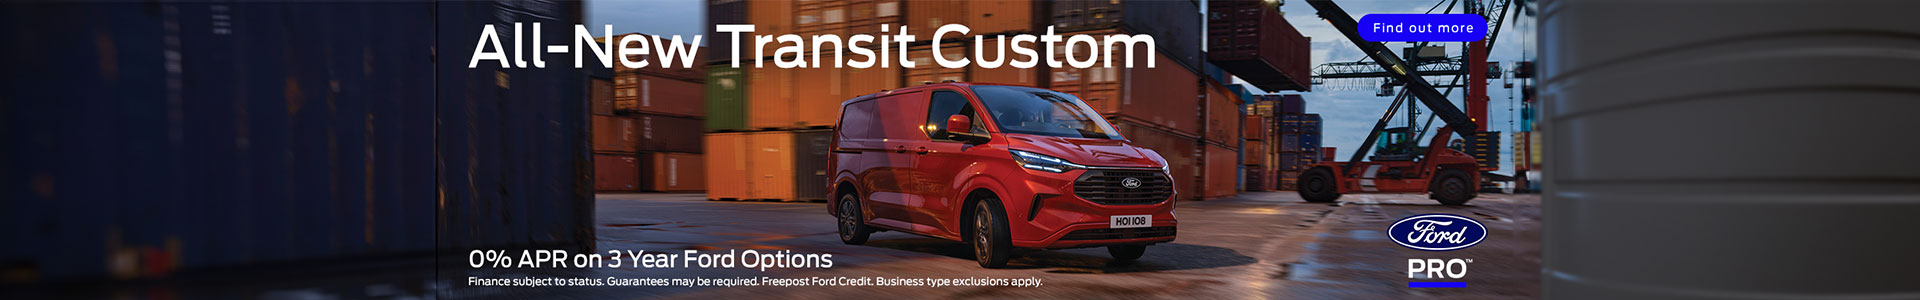 All-New Transit Custom 0% Apr available